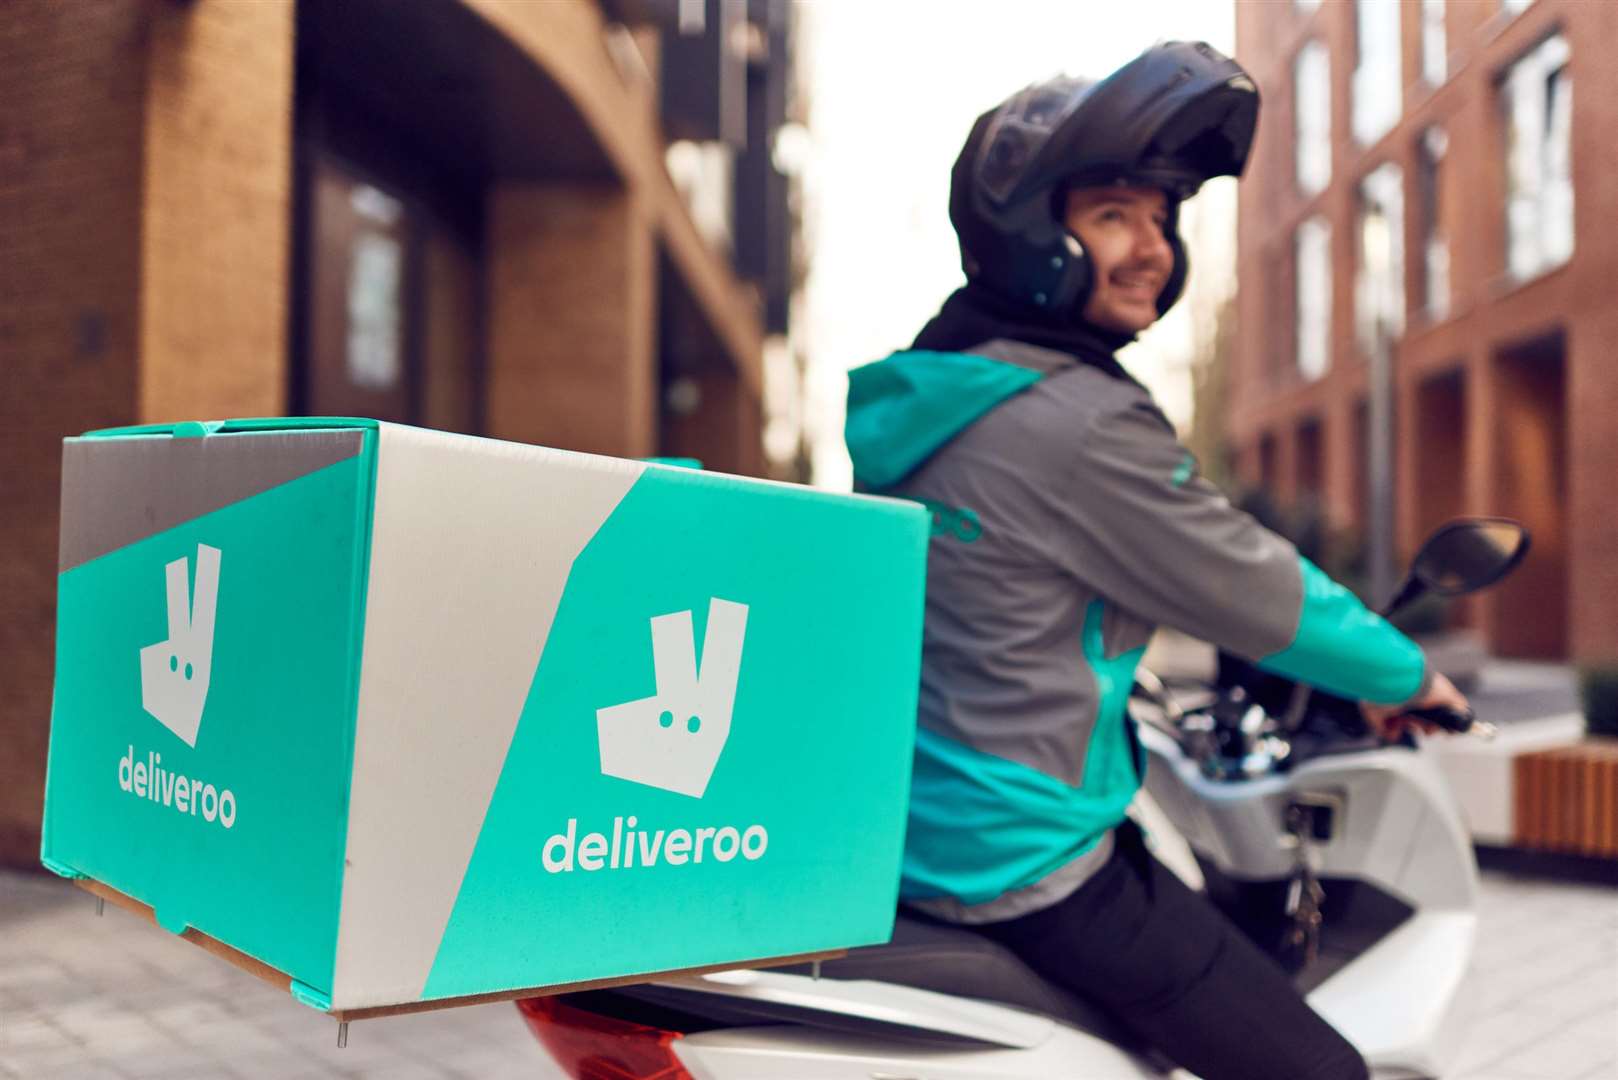 Deliveroo is coming to Tonbridge. Picture: Mikael Buck / Deliveroo